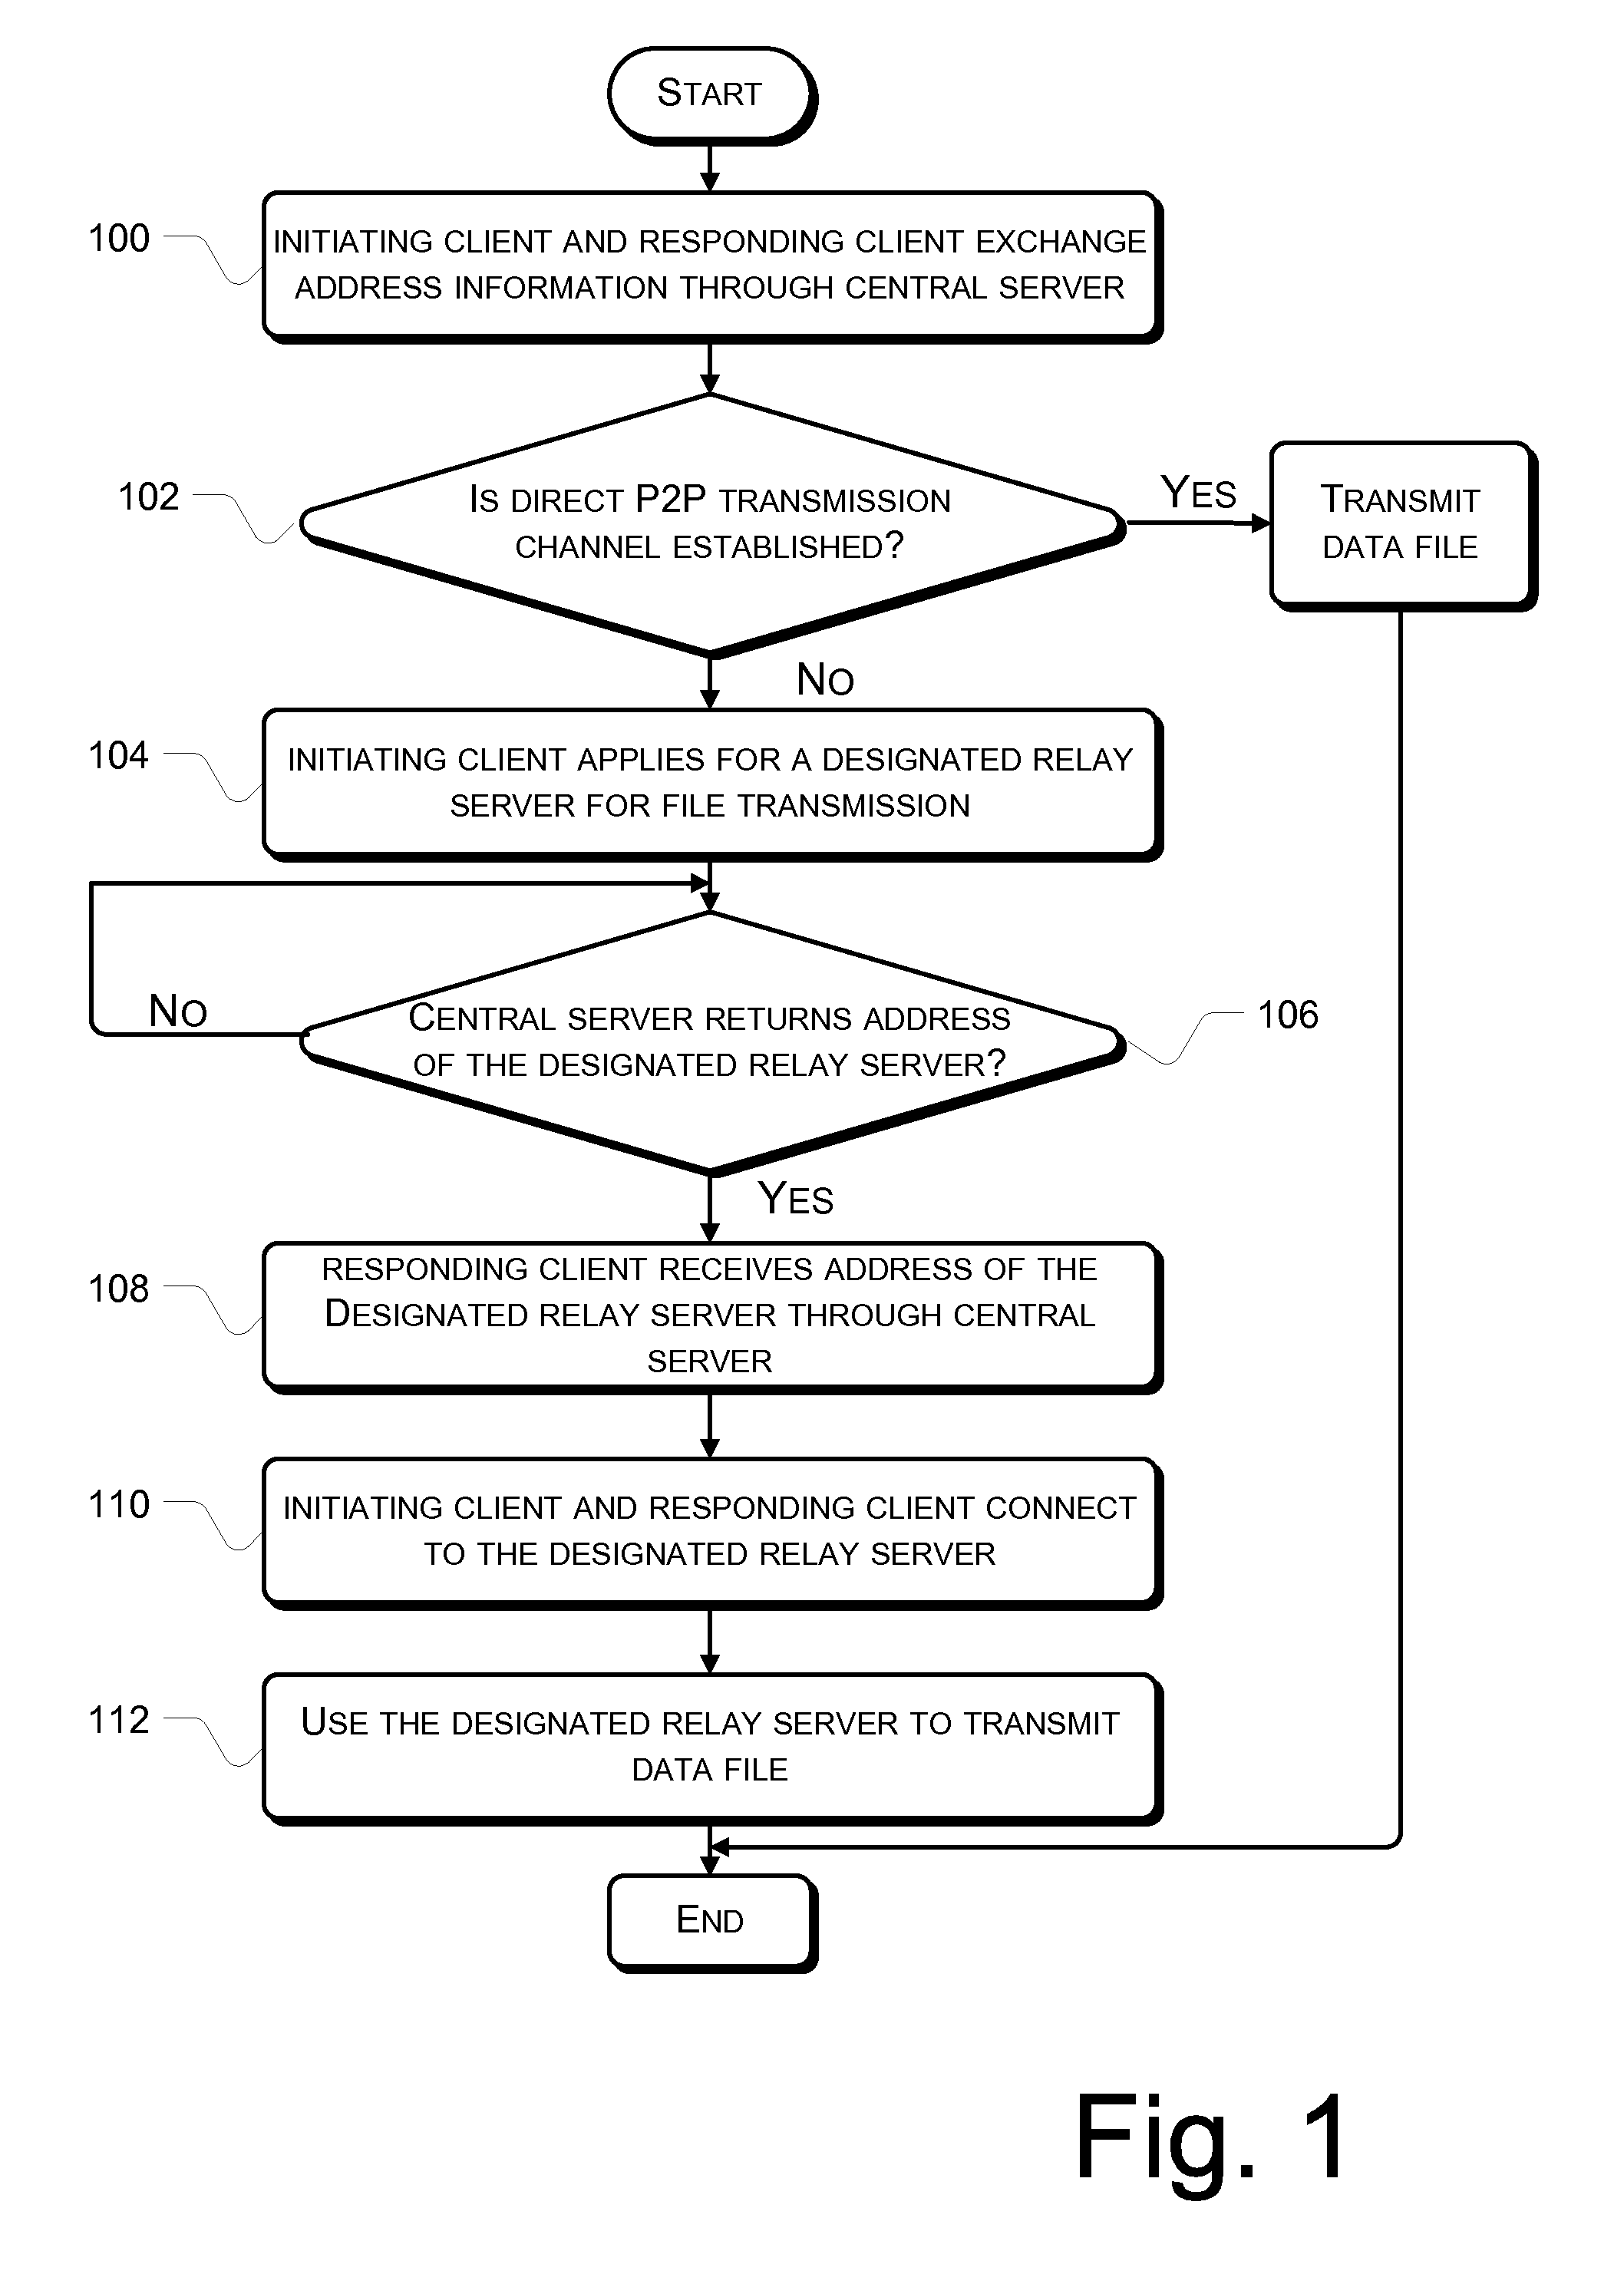 Selective Routing of Data Transmission Between Clients